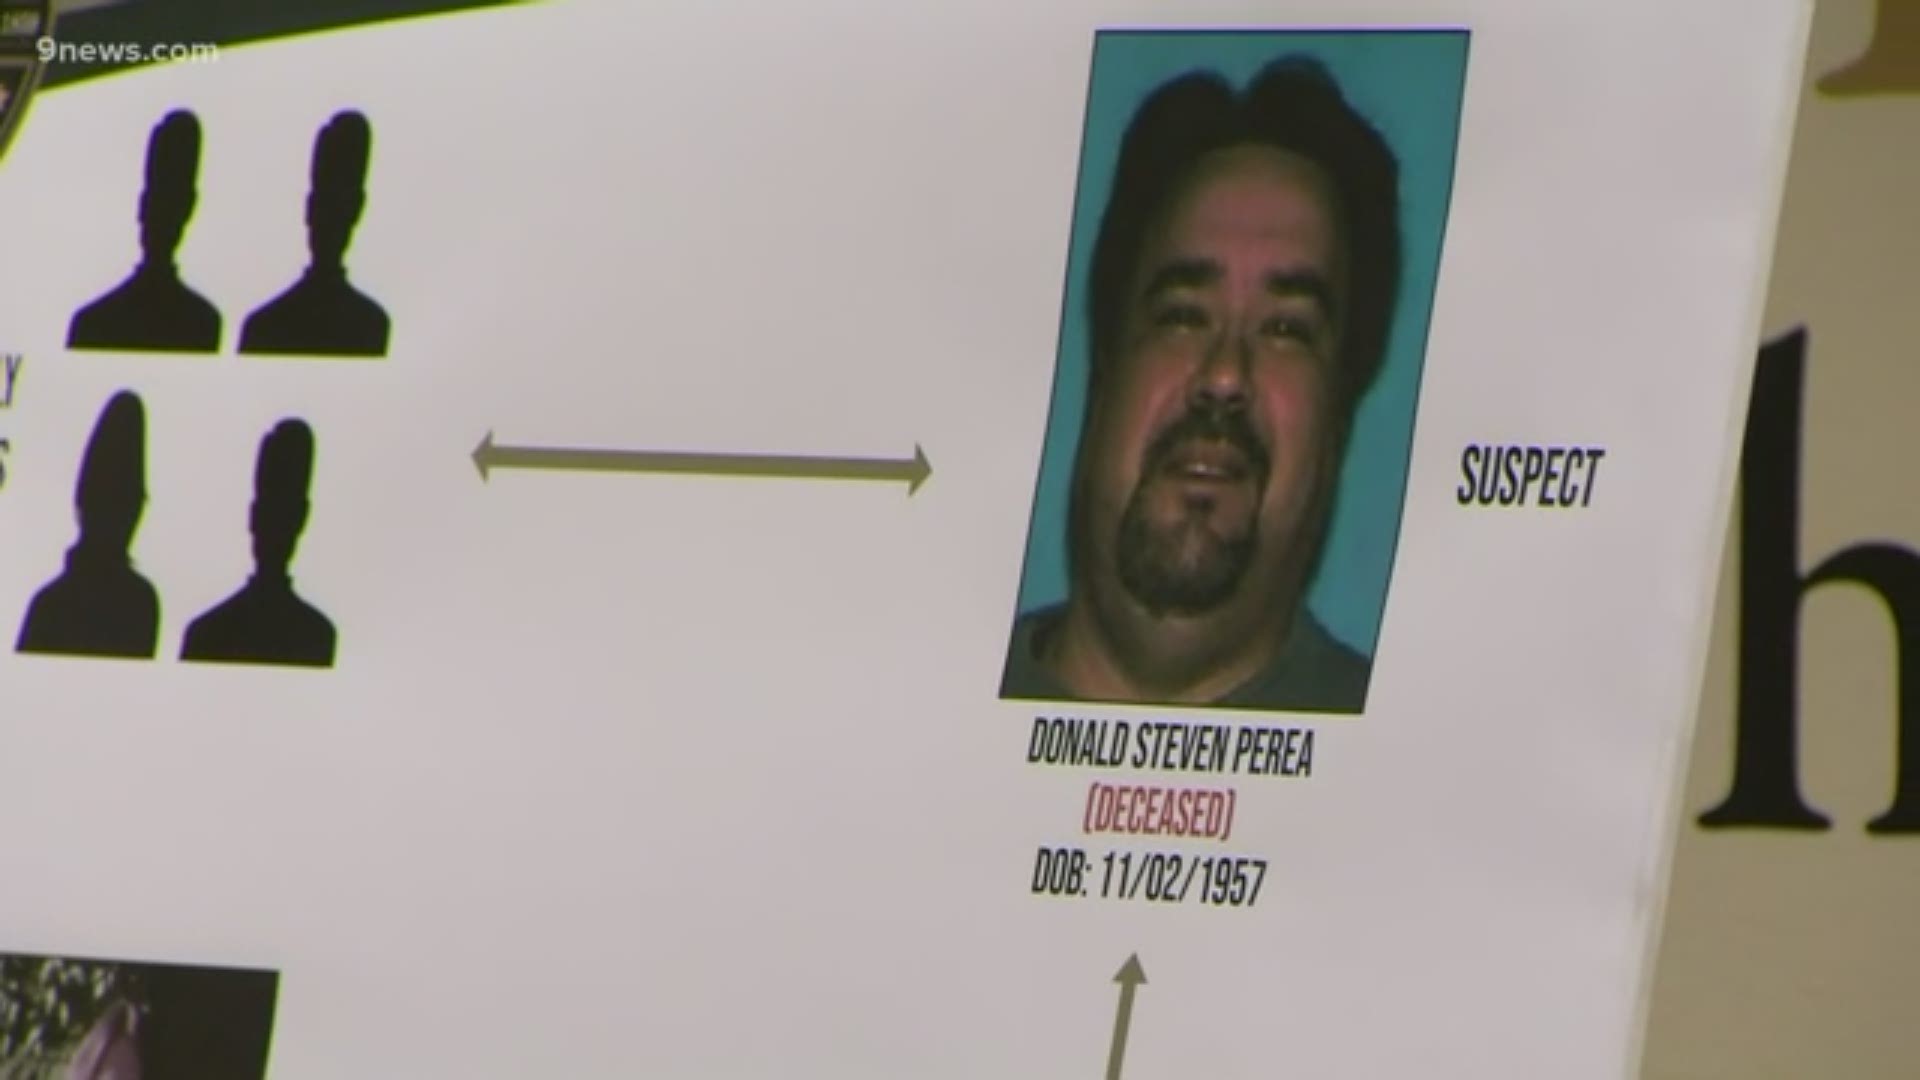 Donald Perea, who died in 2012 due to health-related issues, was identified as the suspect in Moore's killing.